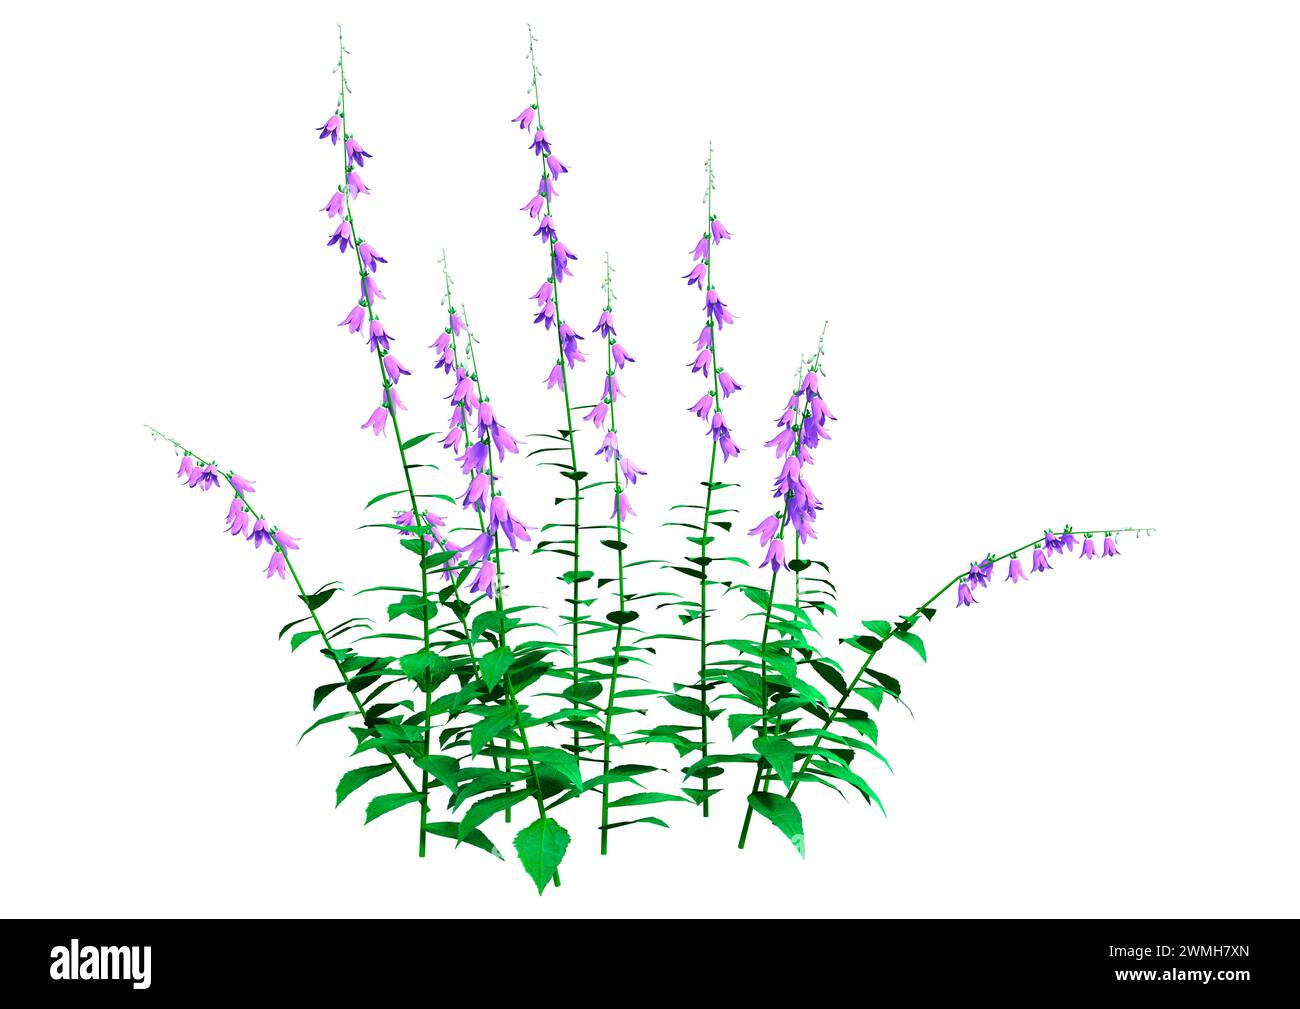 3D rendering of blooming campanula plants or bellflowers isolated on white background Stock Photo